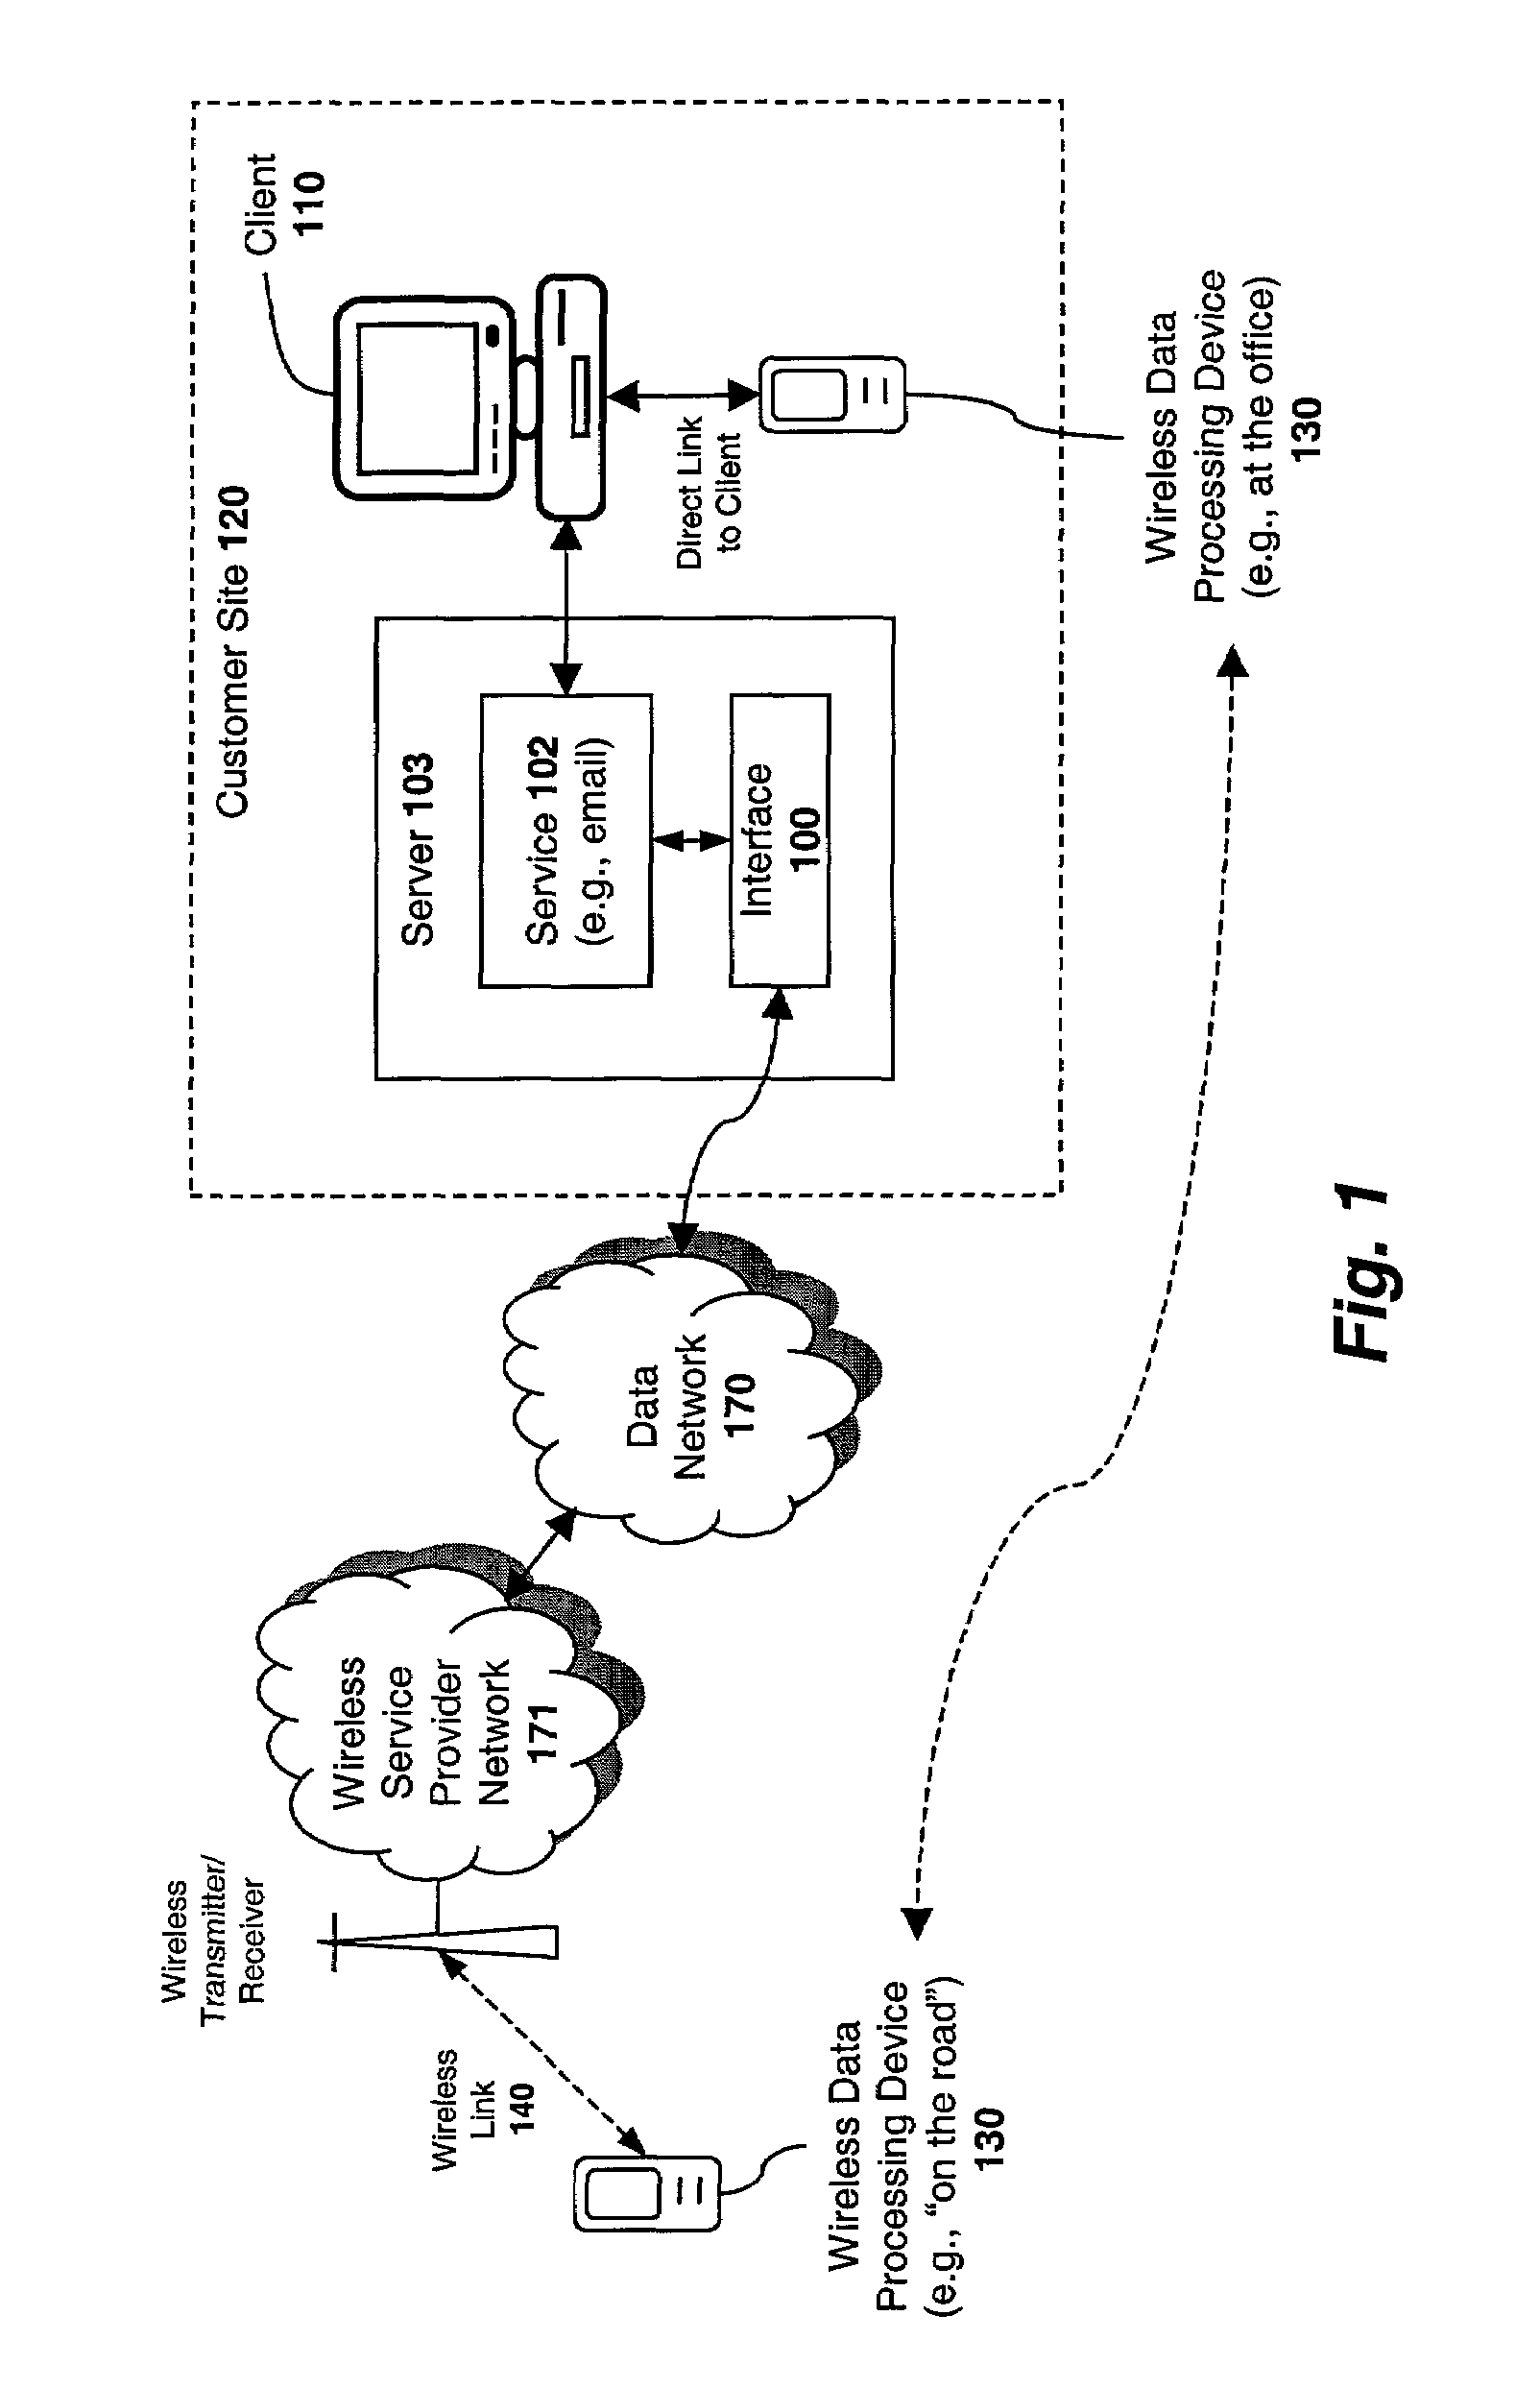 System and method for full wireless synchronization of a data processing apparatus with a messaging system